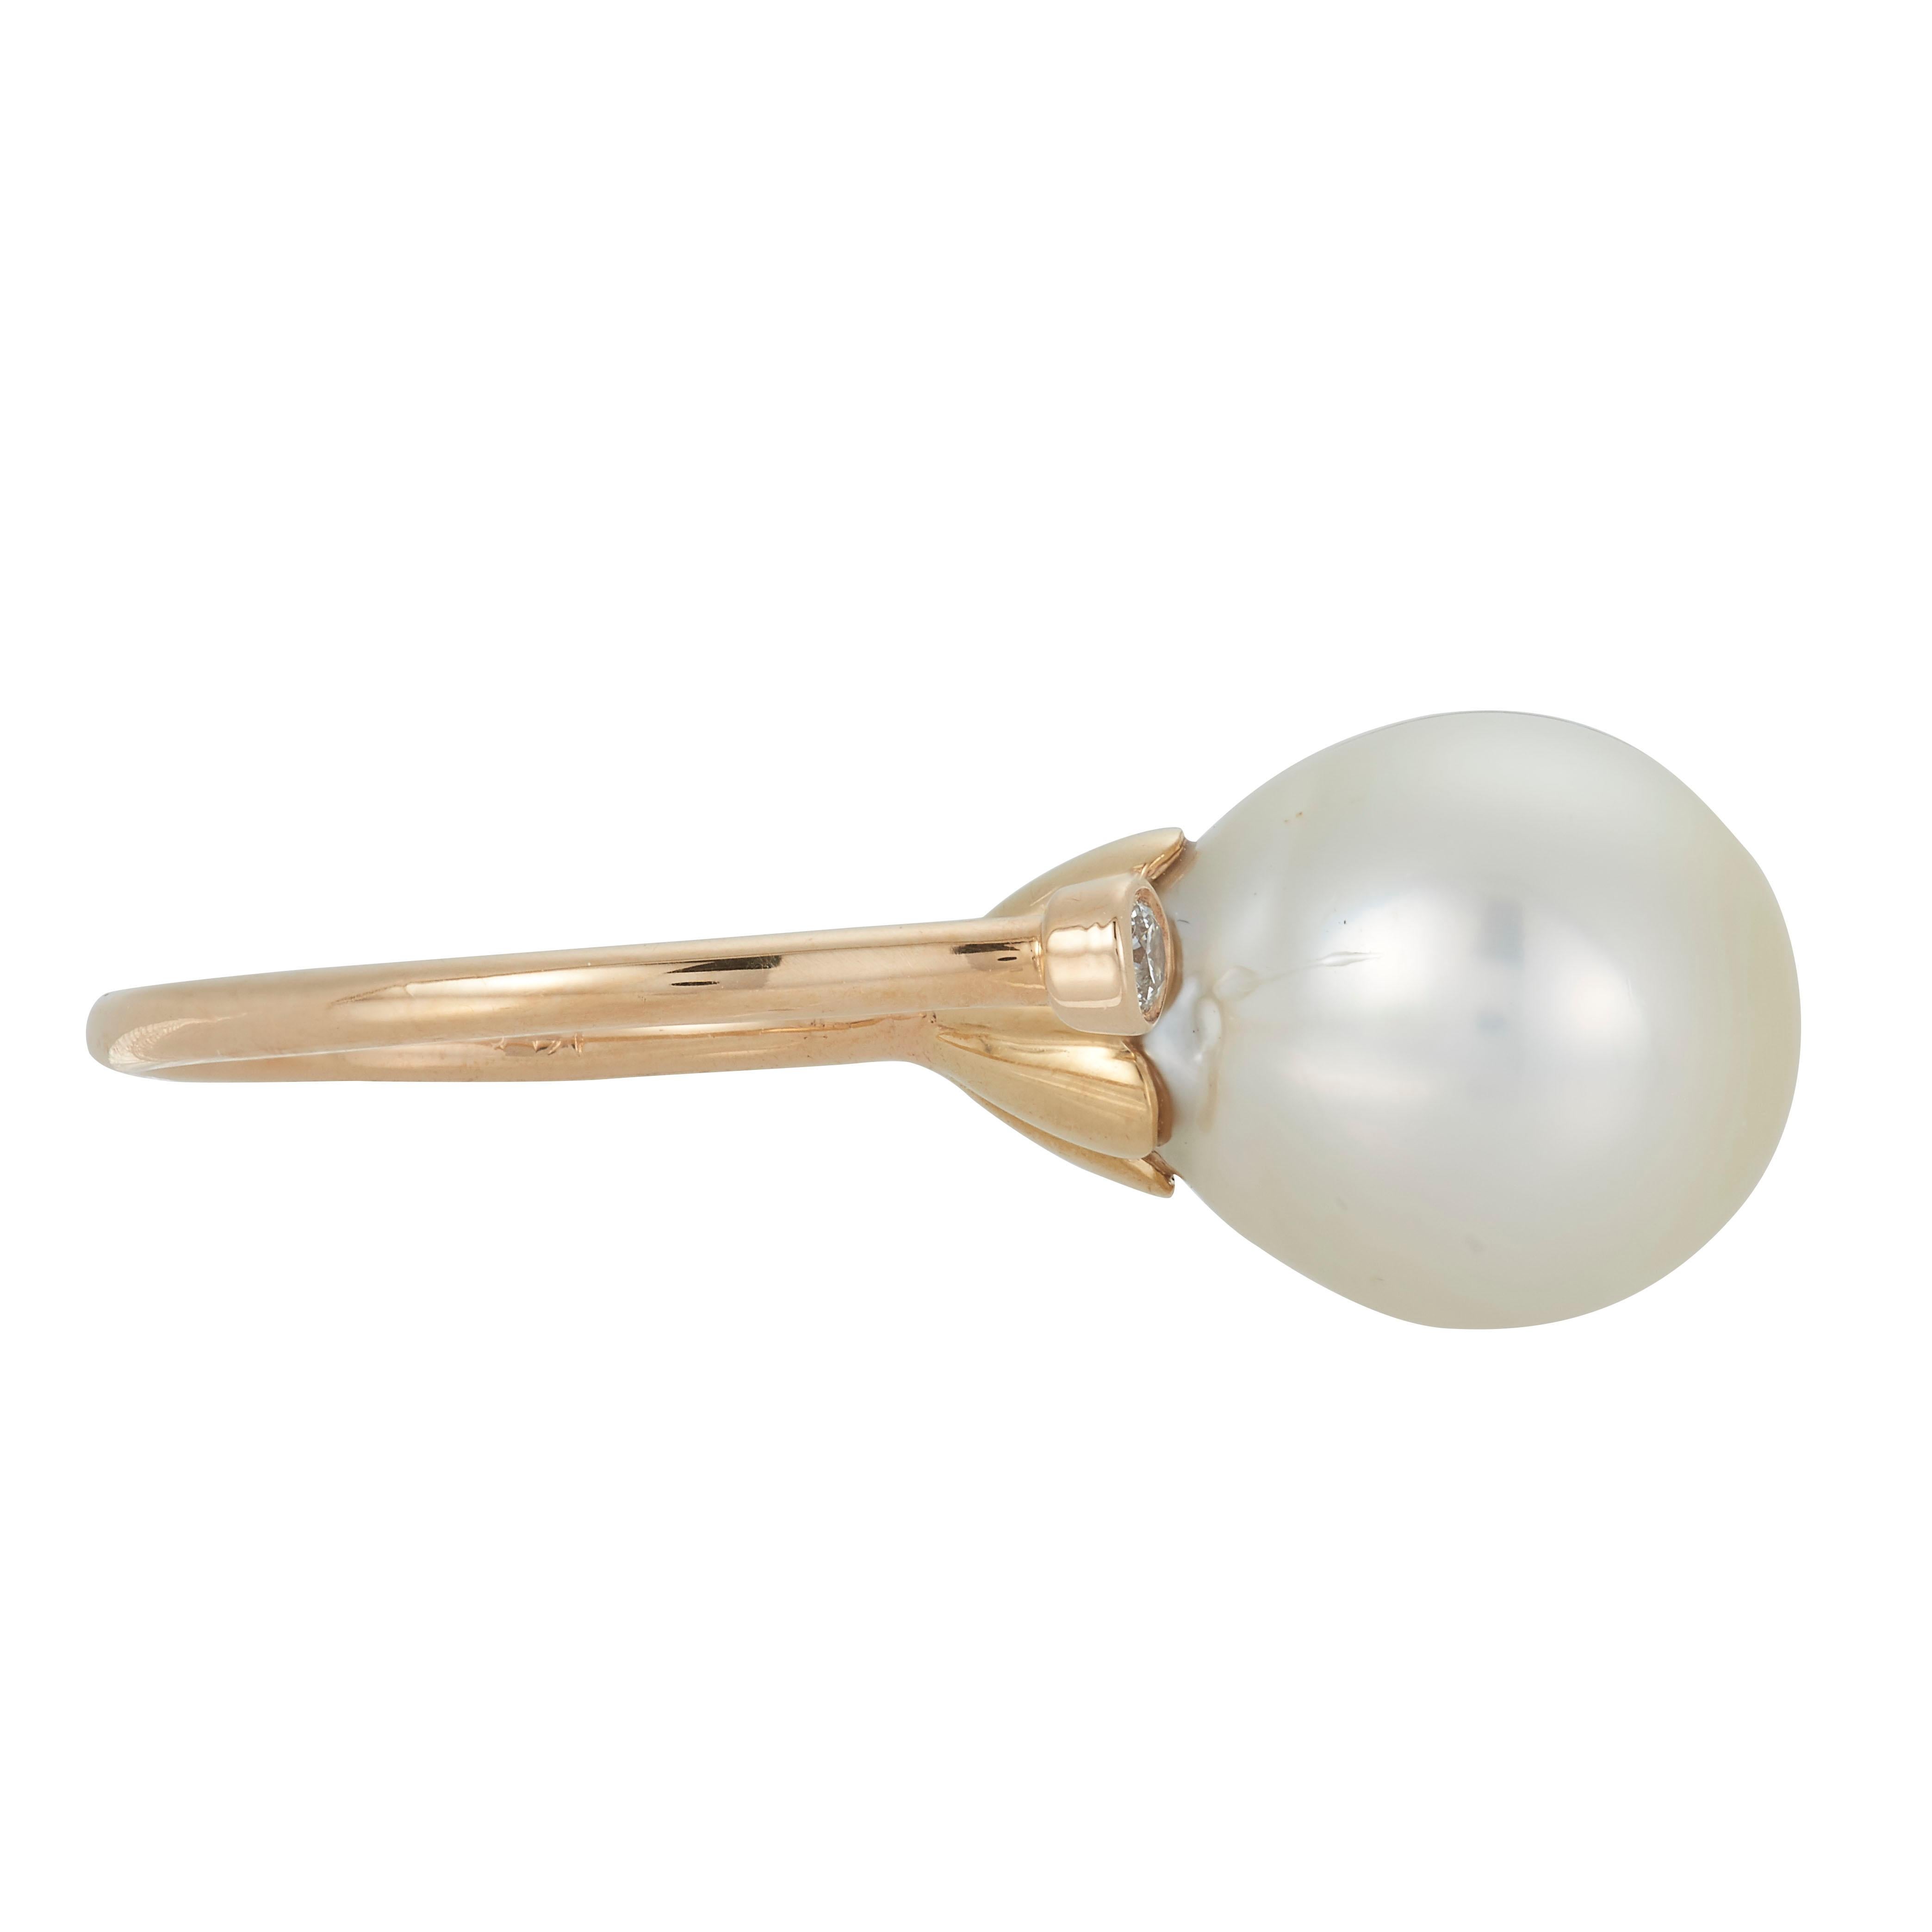 14K Yellow Gold
1 Round Tahitian South Sea Pearl at 12.00 Carats
1 Brilliant Round White Diamond at 0.04 Carats - Color: H-I /Clarity: SI

Alberto offers complimentary sizing on all rings.

Fine one-of-a-kind craftsmanship meets incredible quality